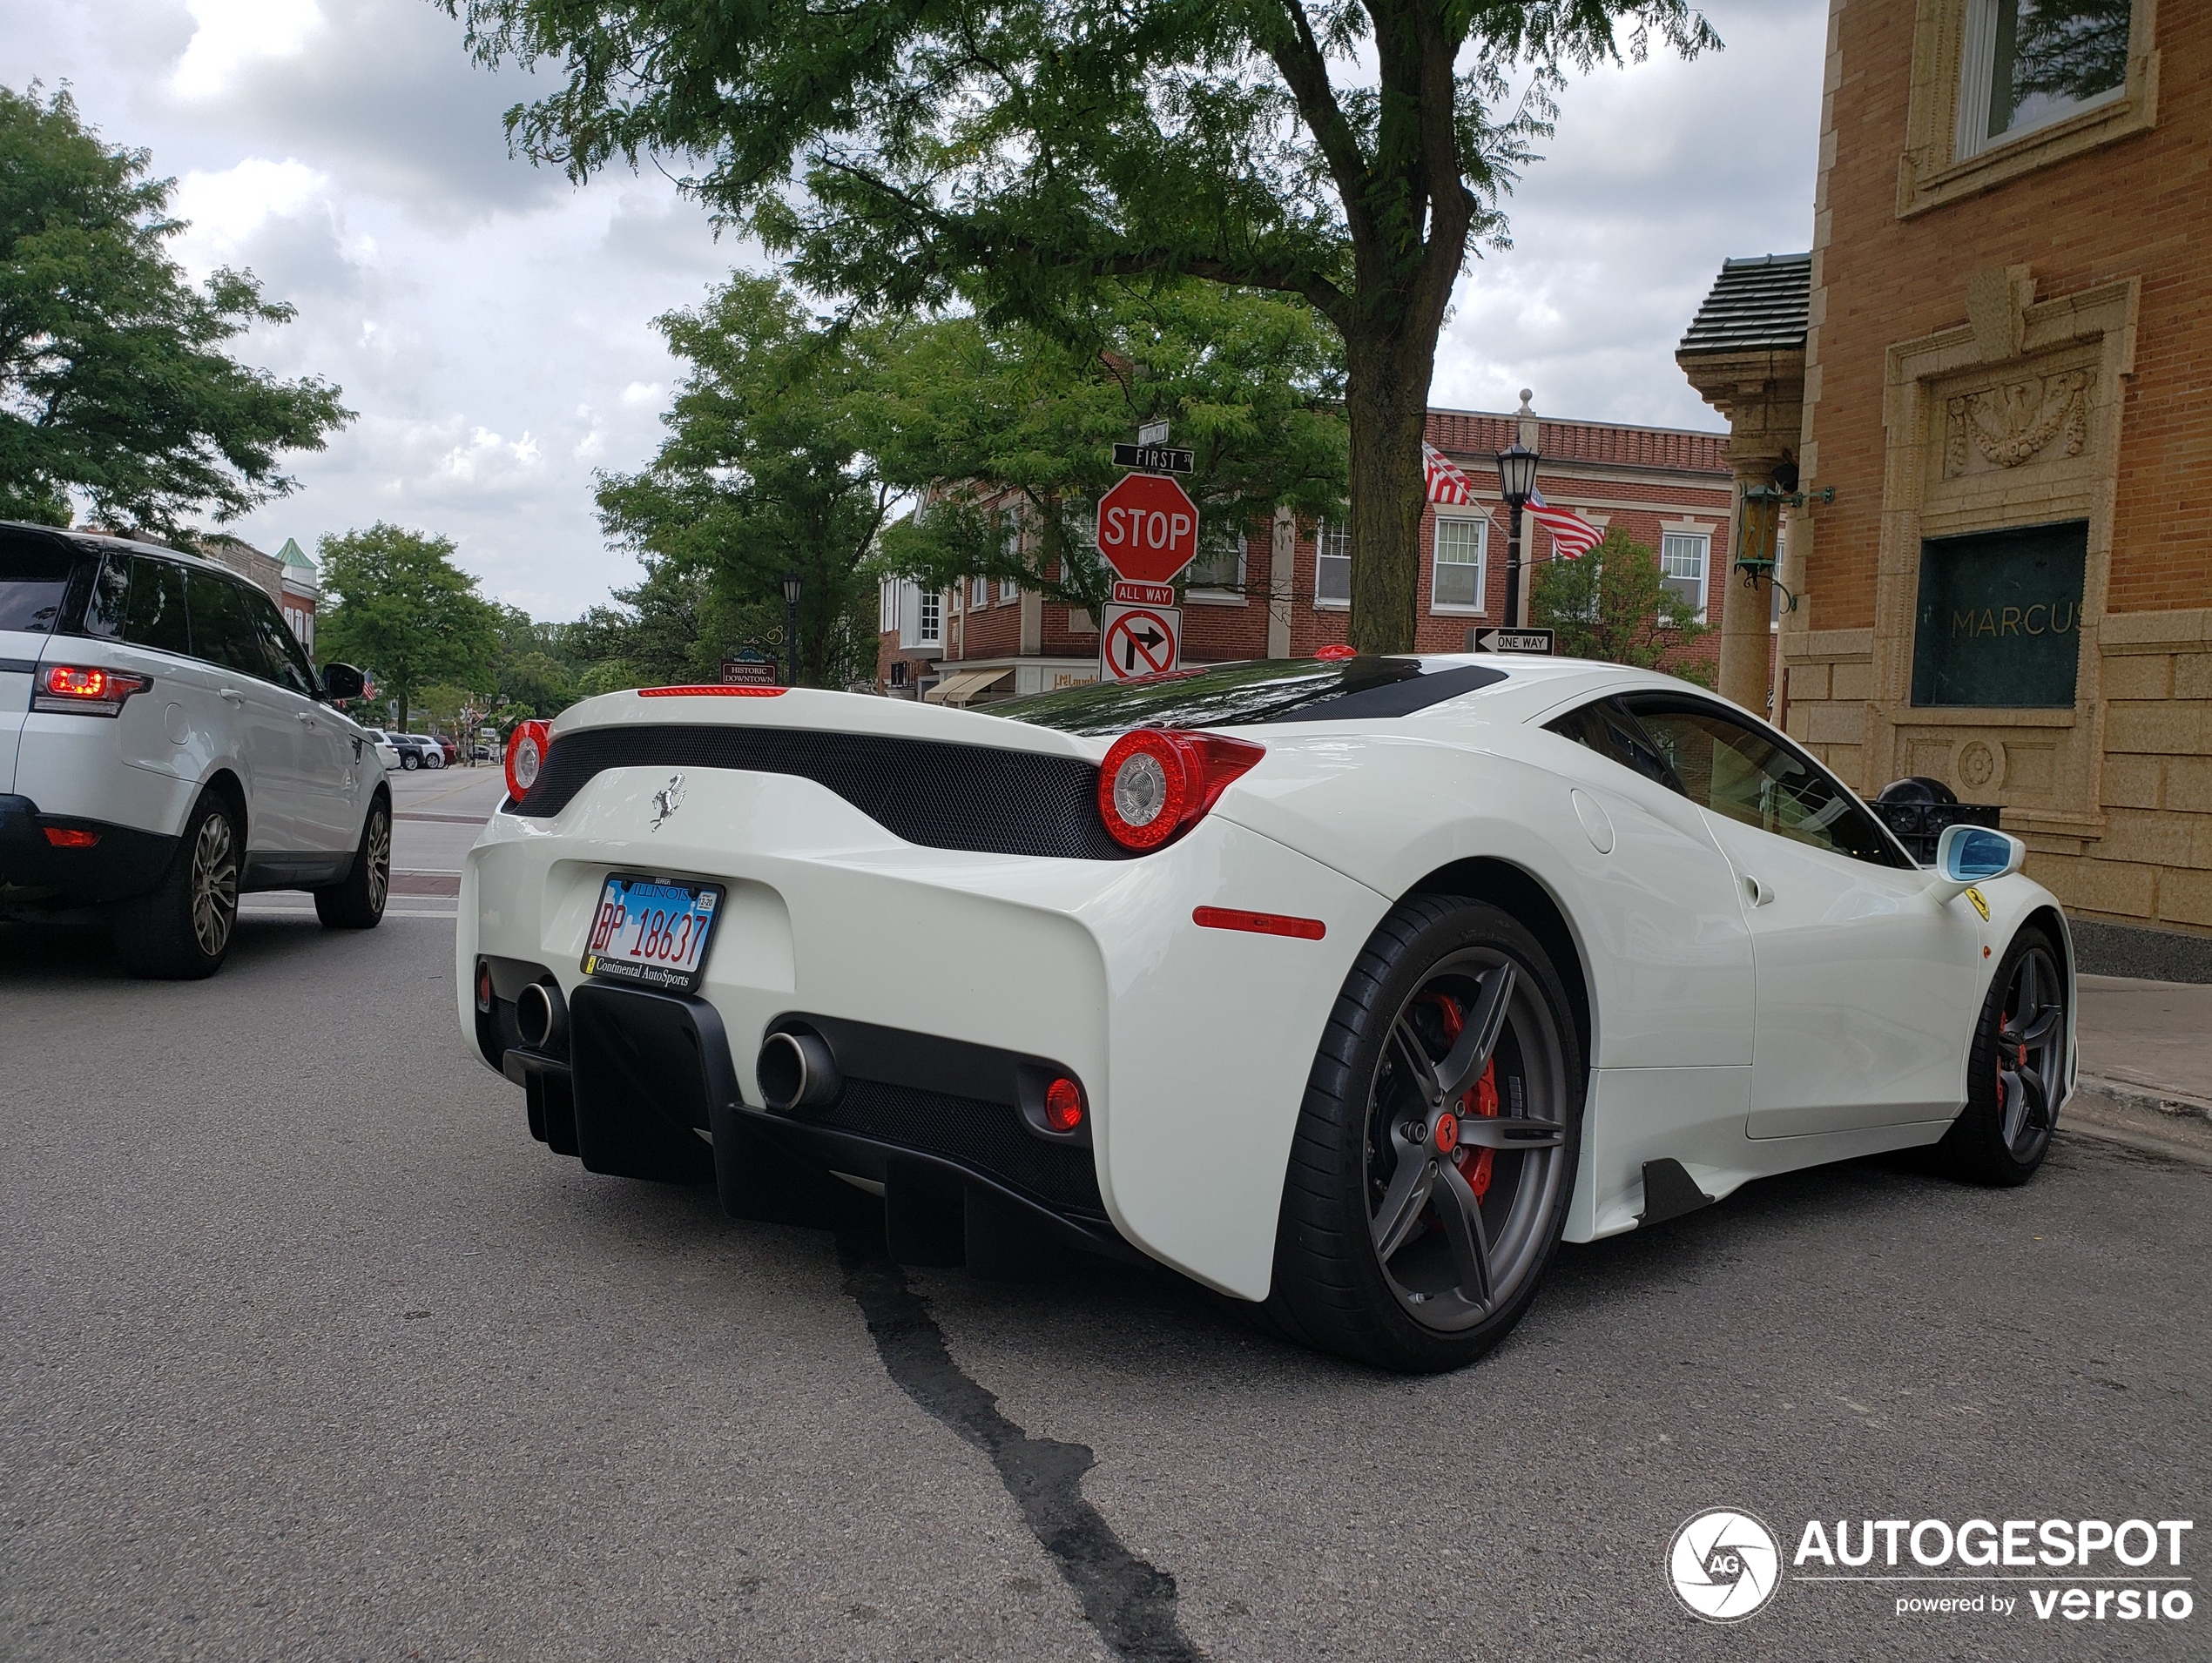 This Ferrari 458 Speciale belongs to the more exquisite category...